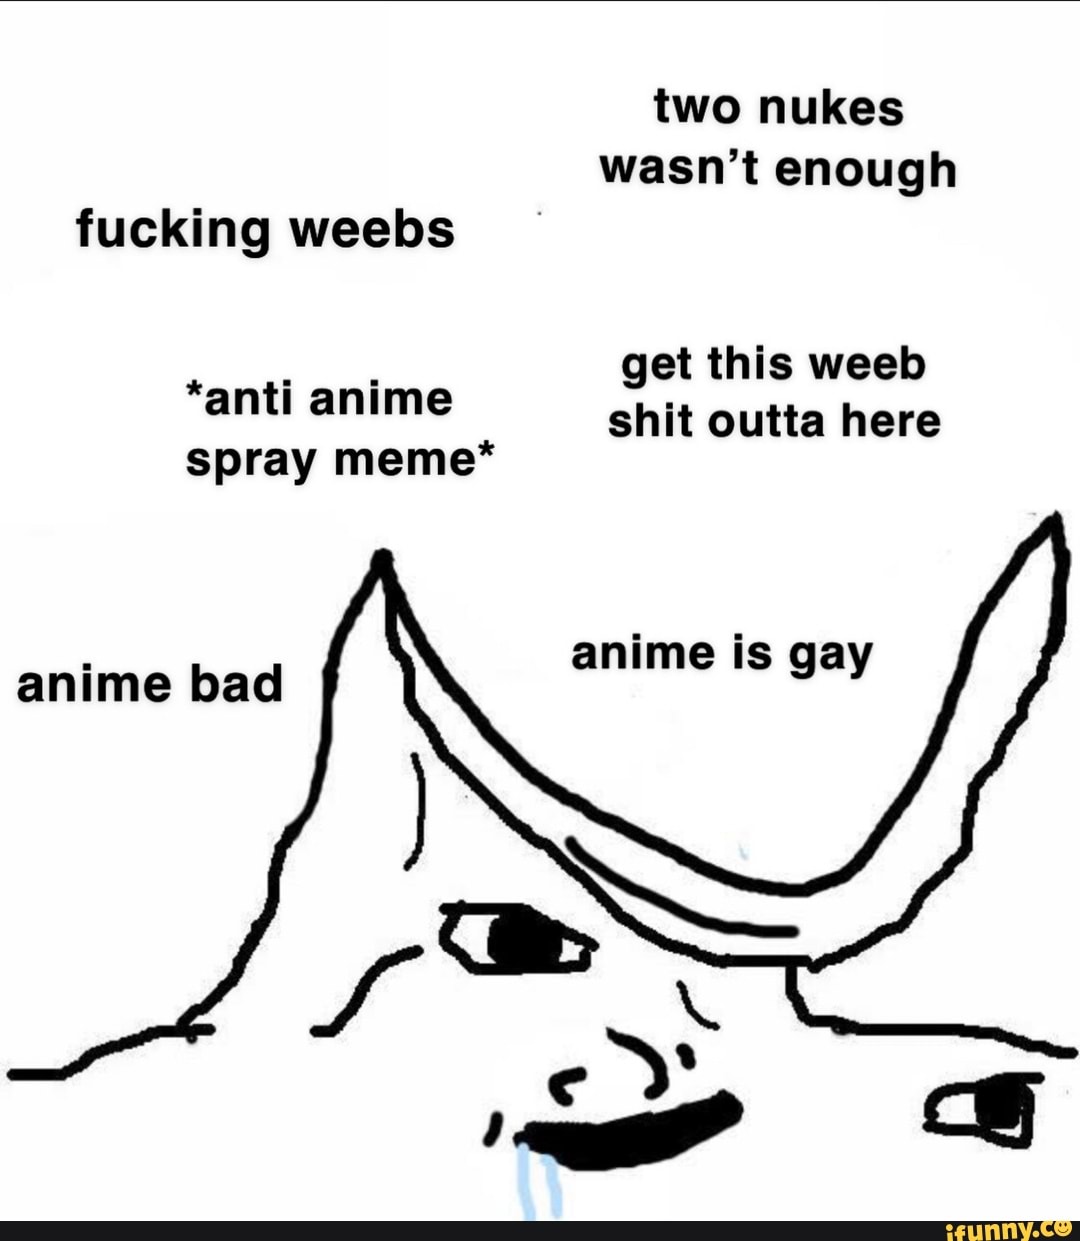 Enough Fucking Weebs Get This Weeb Shit Outta Here Anti Anime Spray Meme If...